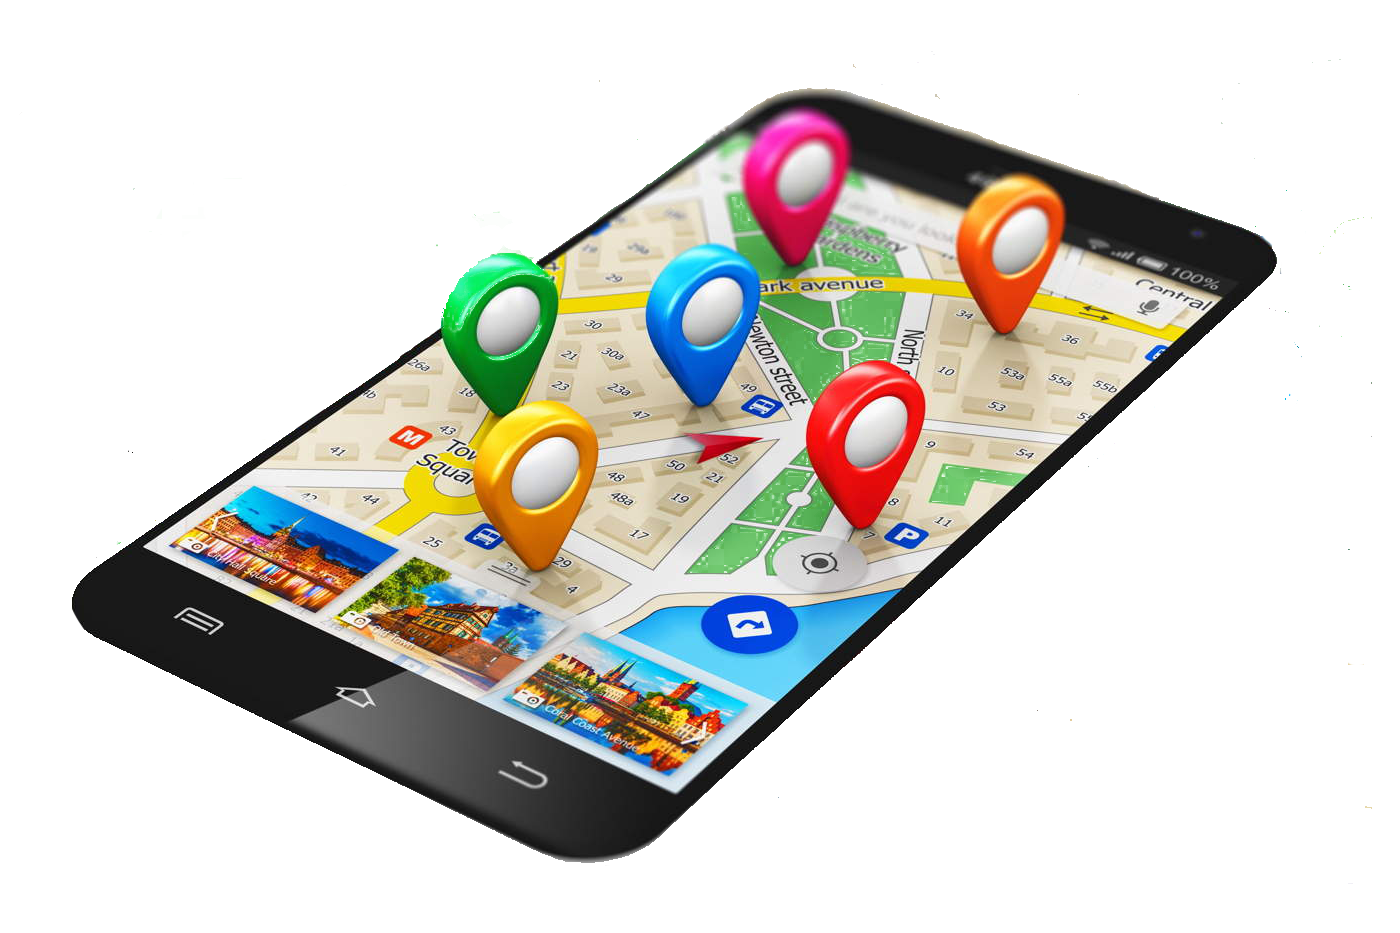 Location-Based Marketing Drives Hot Leads Fast to Your Store, Website